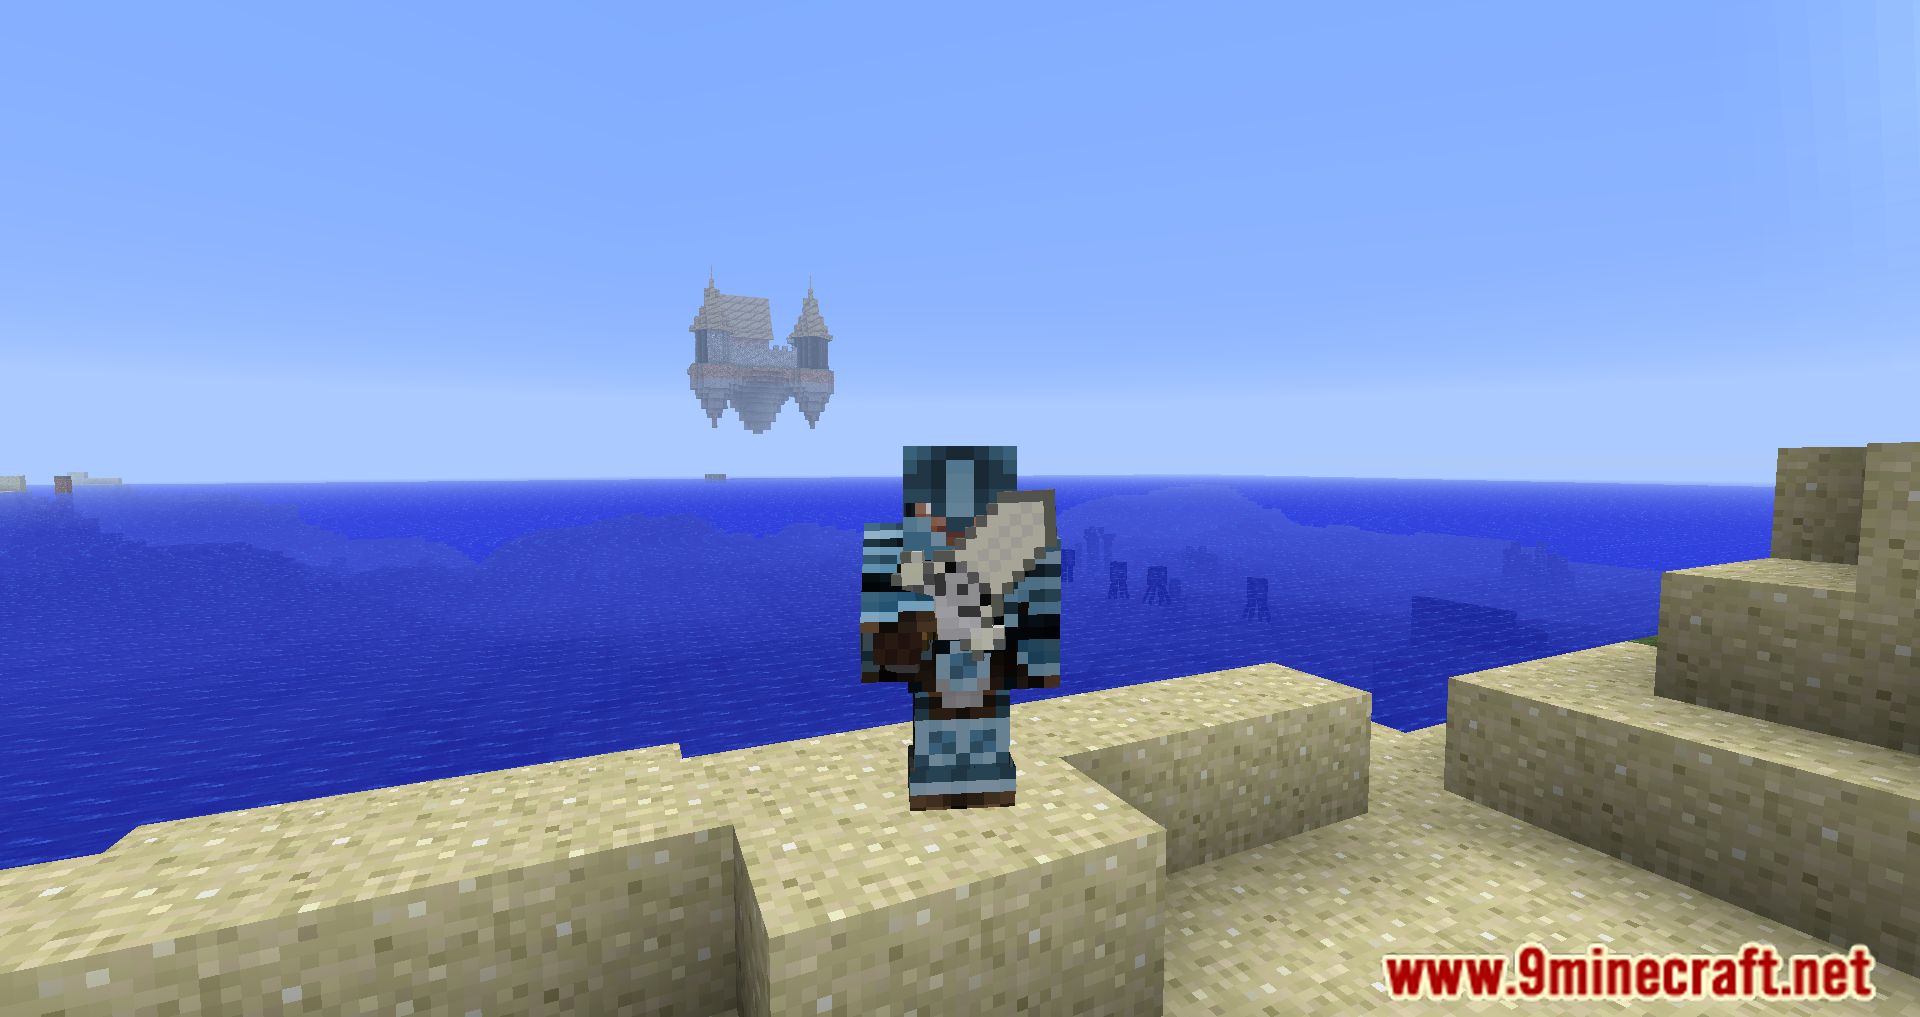 Hexxit 2 Modpack Review  Minecraft Modpack Review (1.12.2 Modpack